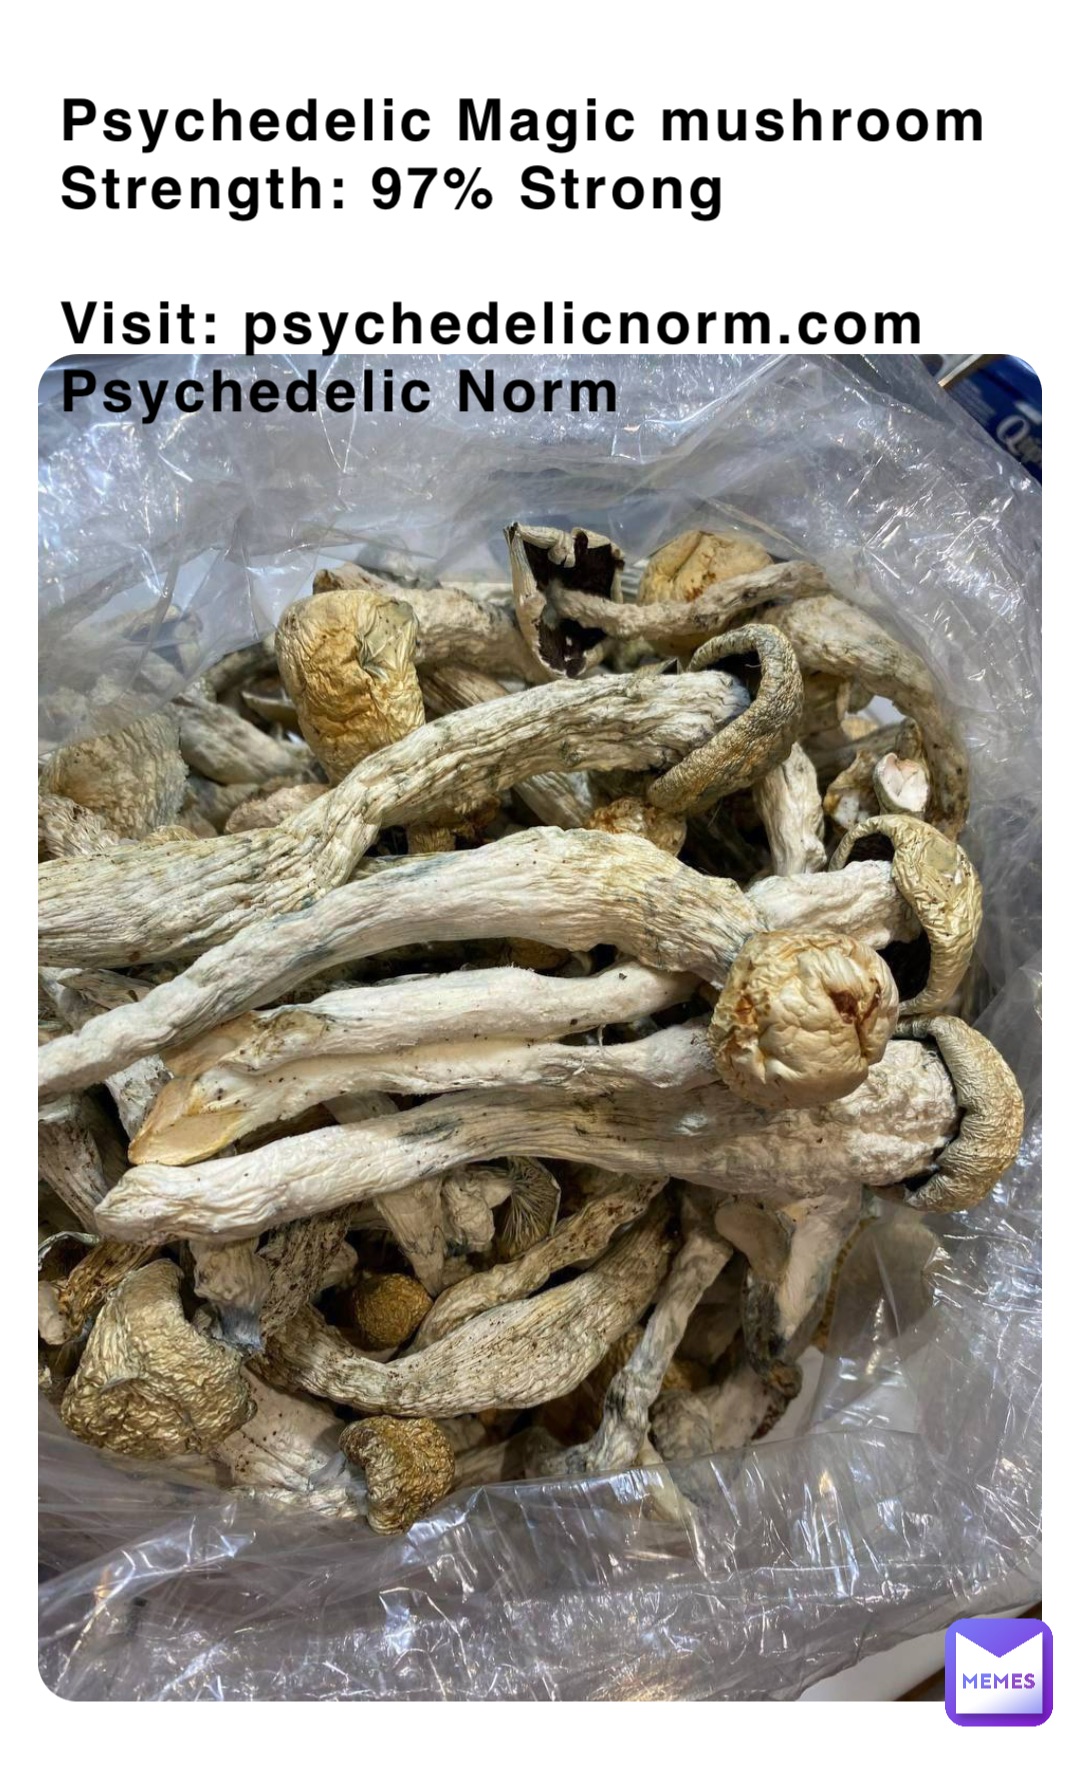 Psychedelic Magic mushroom
Strength: 97% Strong

Visit: psychedelicnorm.com
Psychedelic Norm